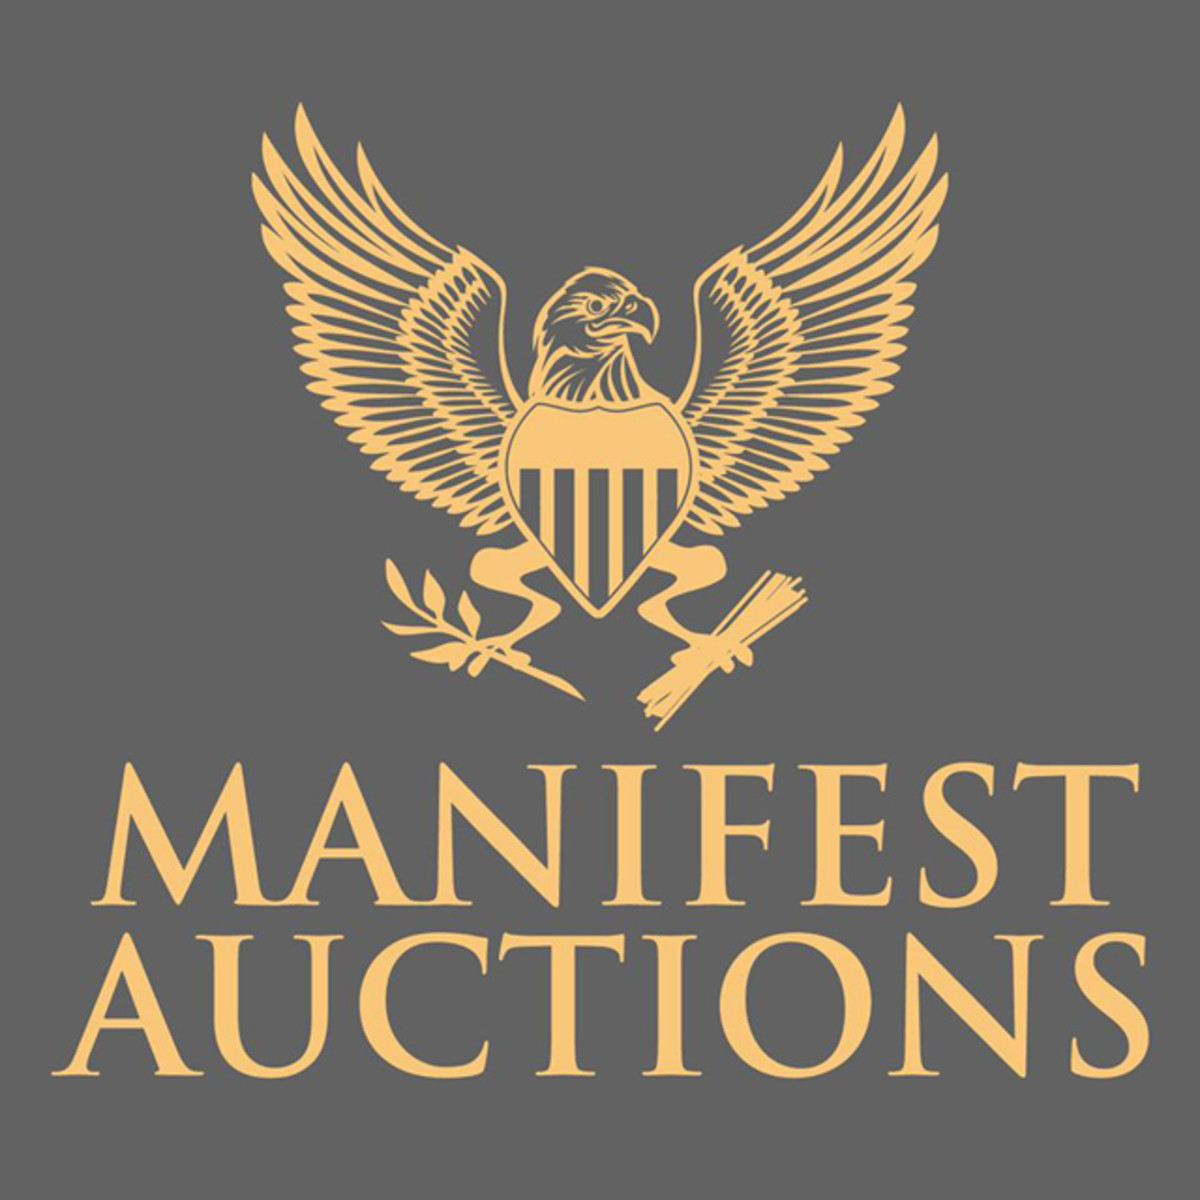 Manifest Auctions was acquired by Stack's Bowers Galleries.